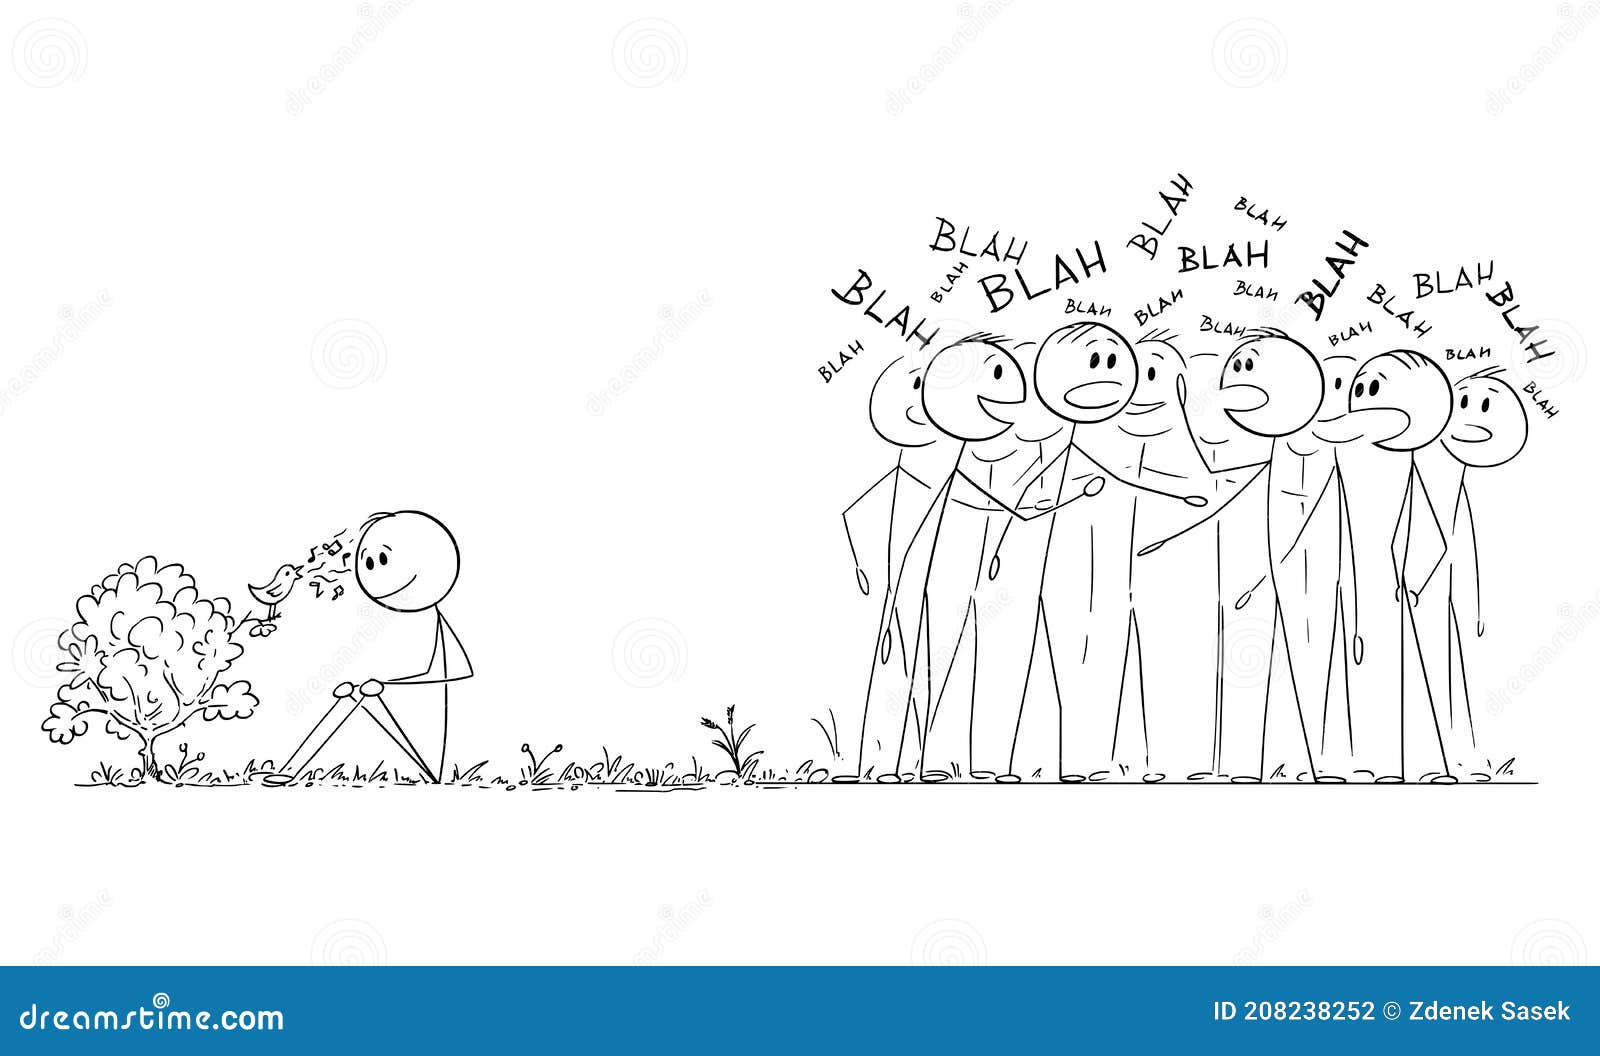 man is hearing singing bird while crowd is chattering and ignoring the nature,  cartoon stick figure 